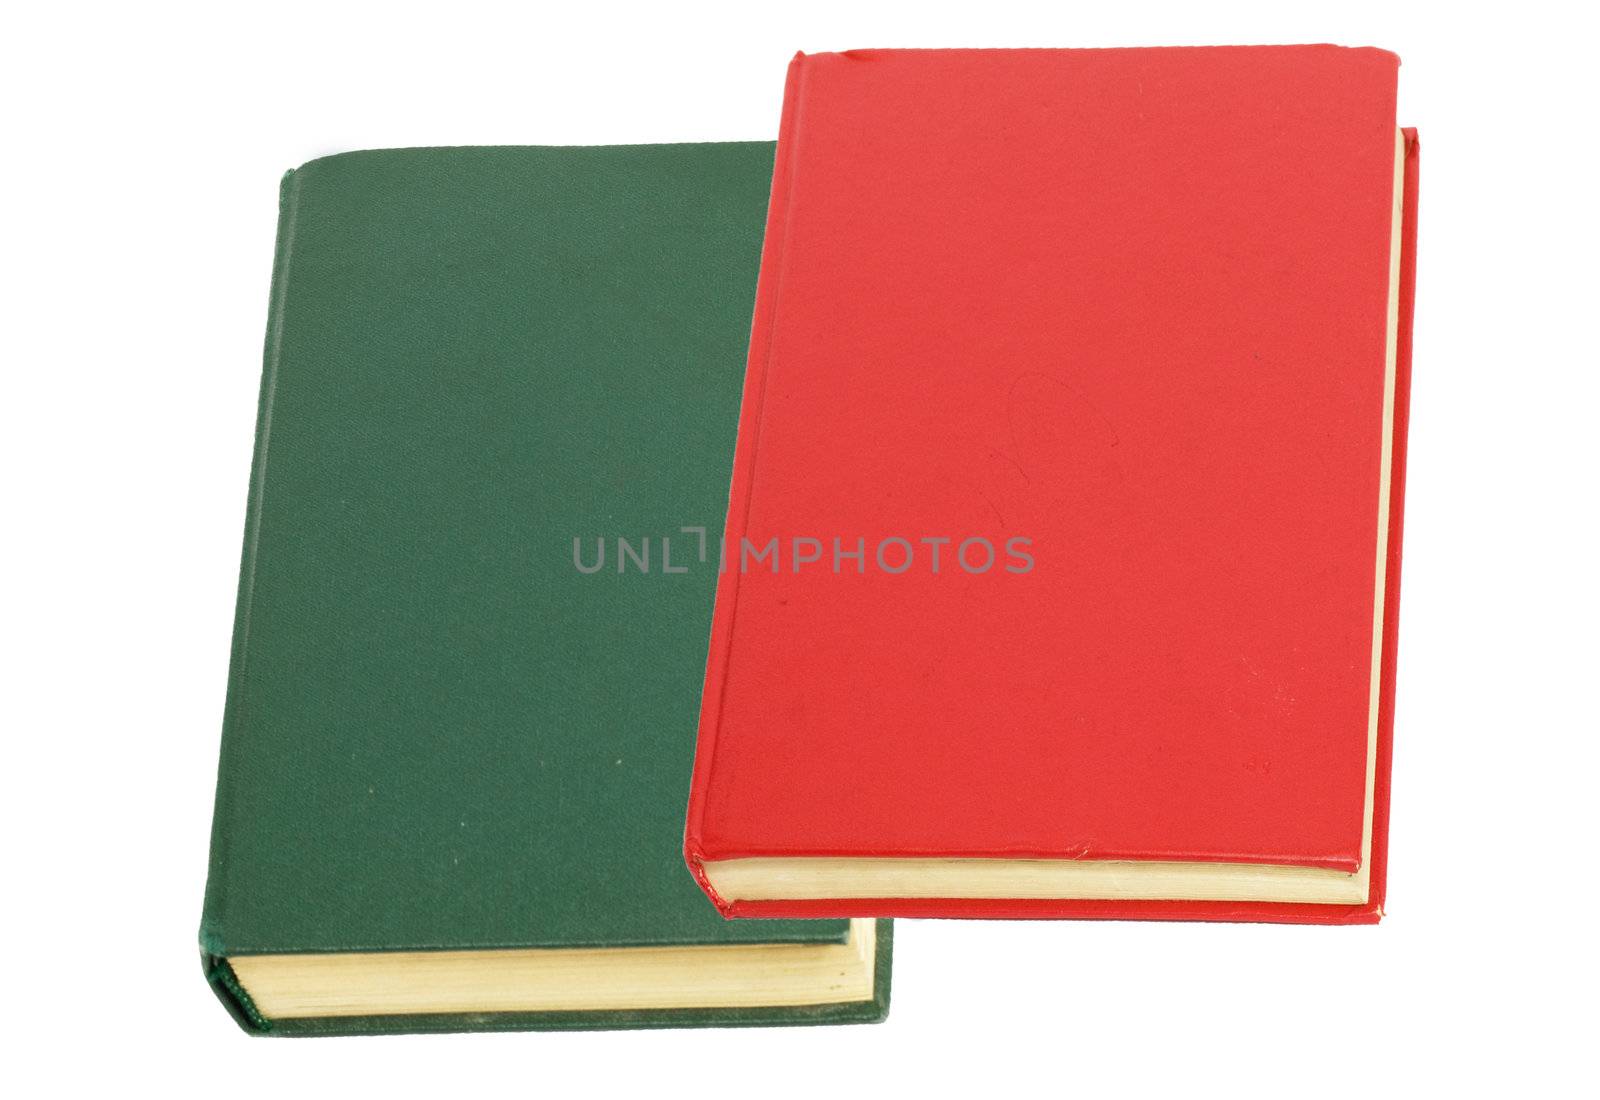 green book and red book on white background  by schankz